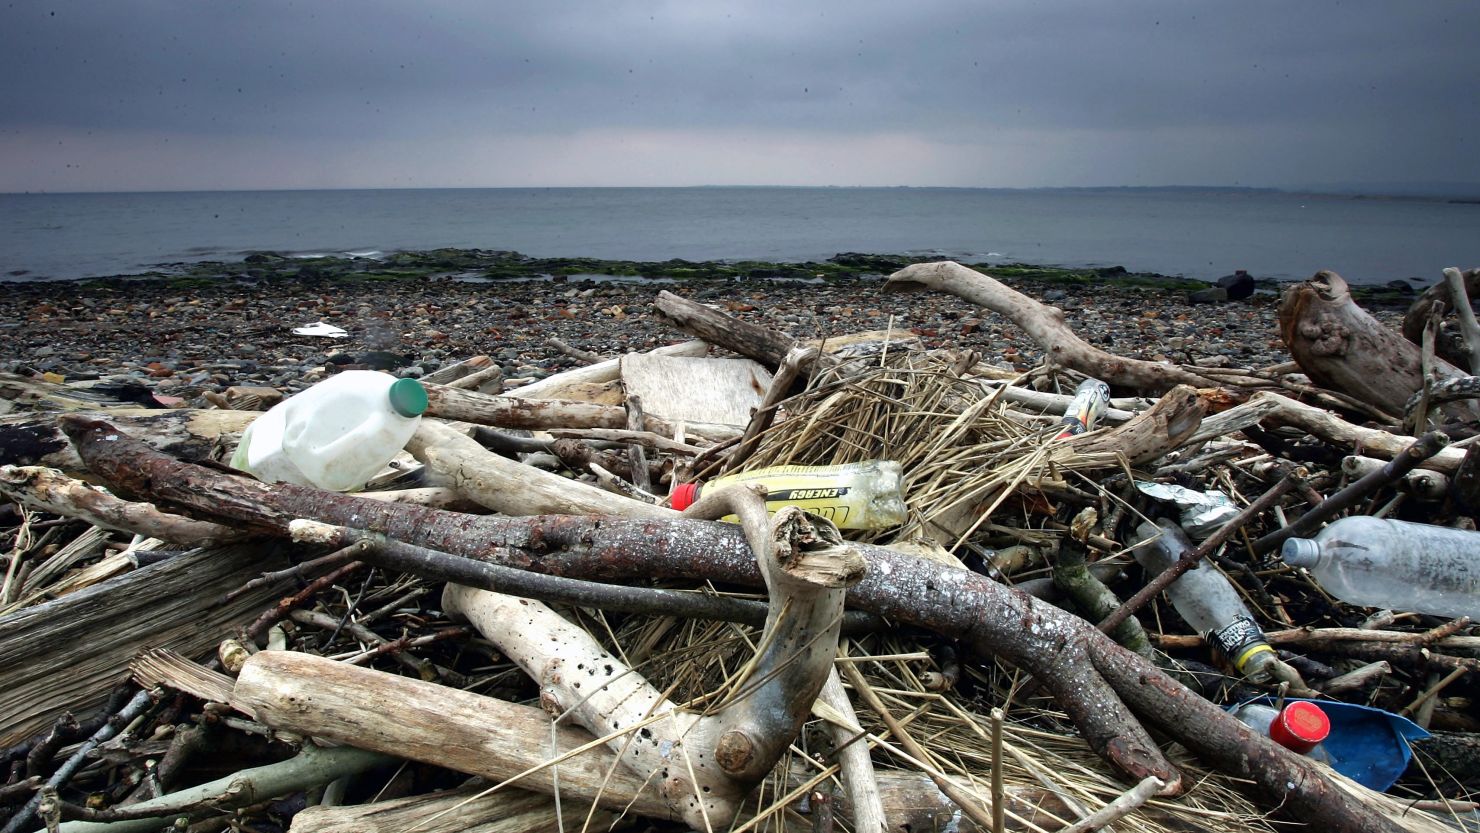 More than 220,000 items of trash were plucked from Britain's beaches during an annual cleanup in 2013.